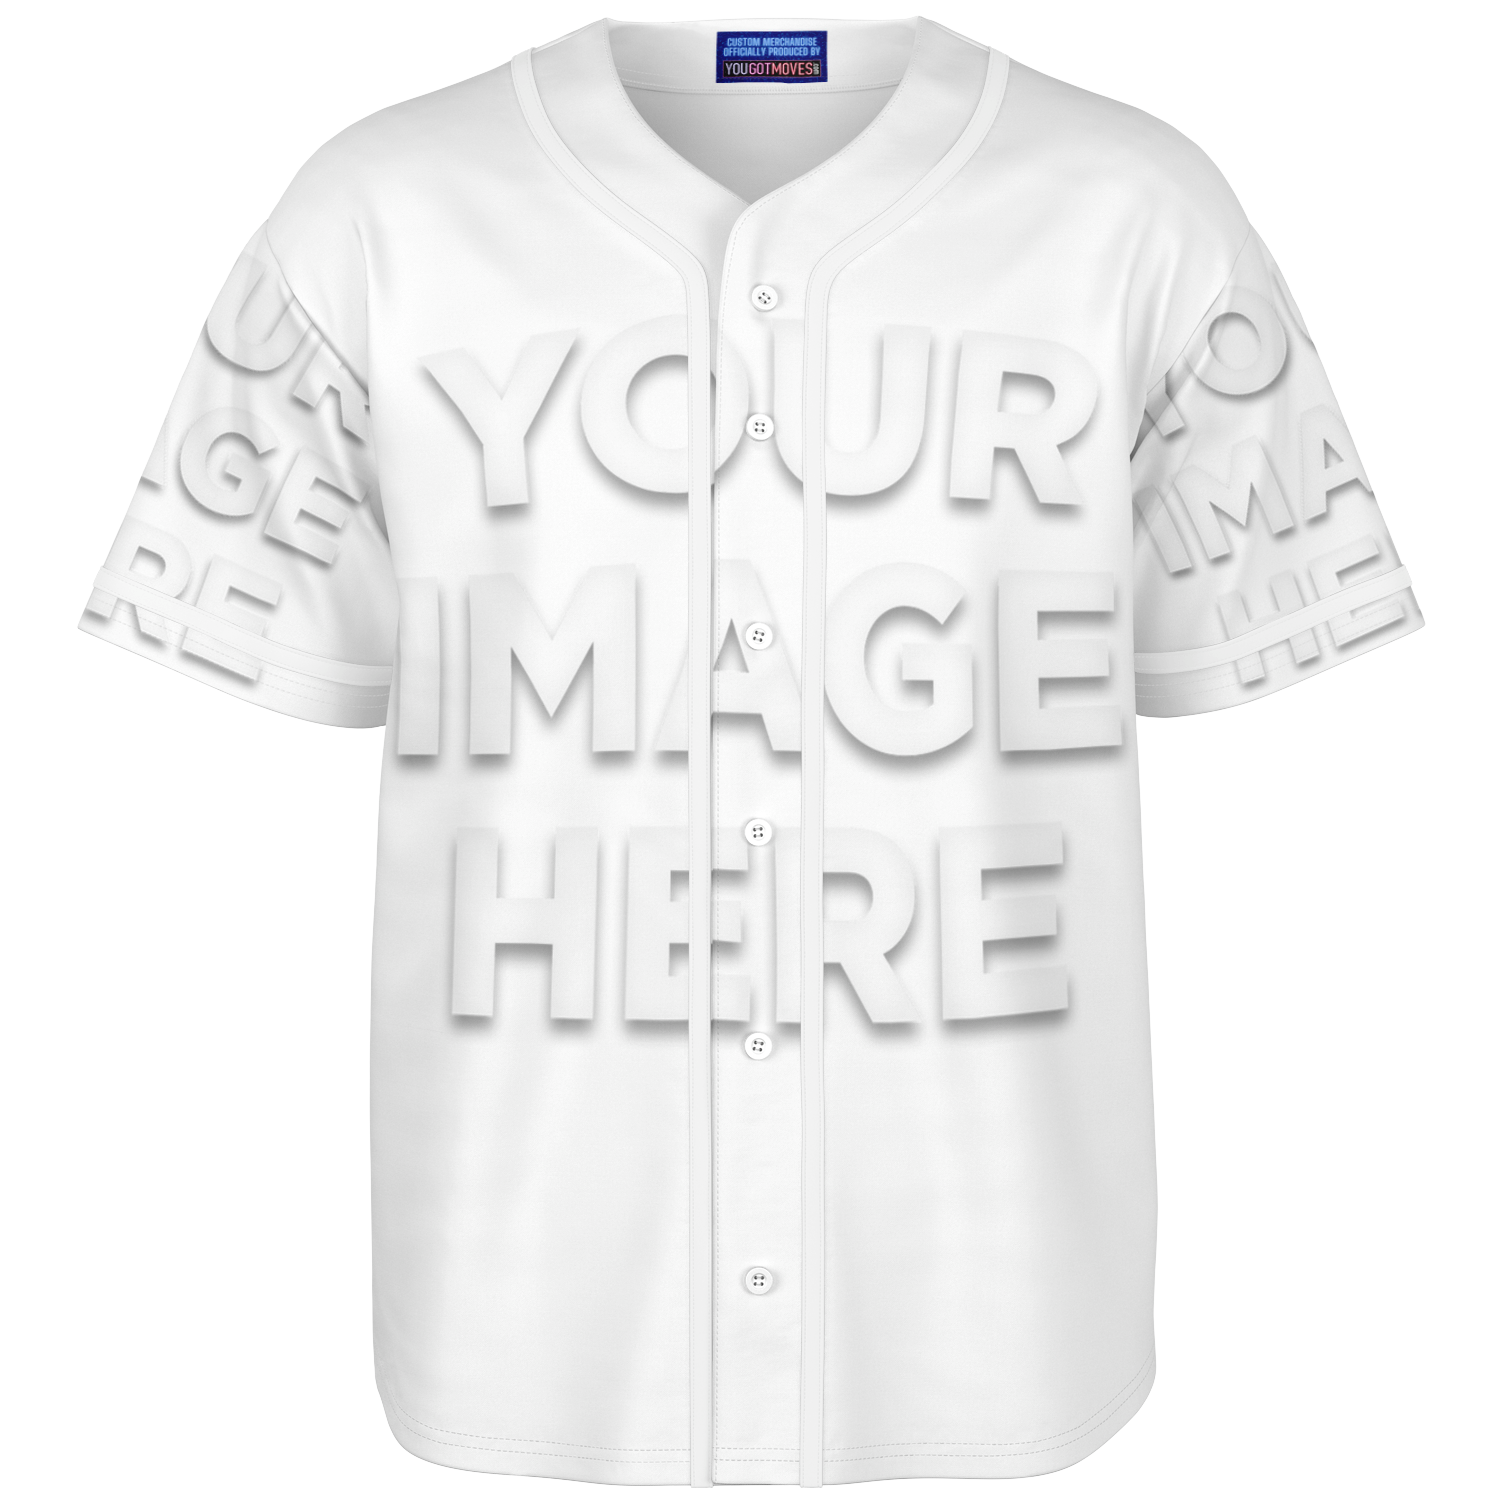 CANVAS BASEBALL JERSEY - BUILD YOUR OWN YGM – You Got Moves